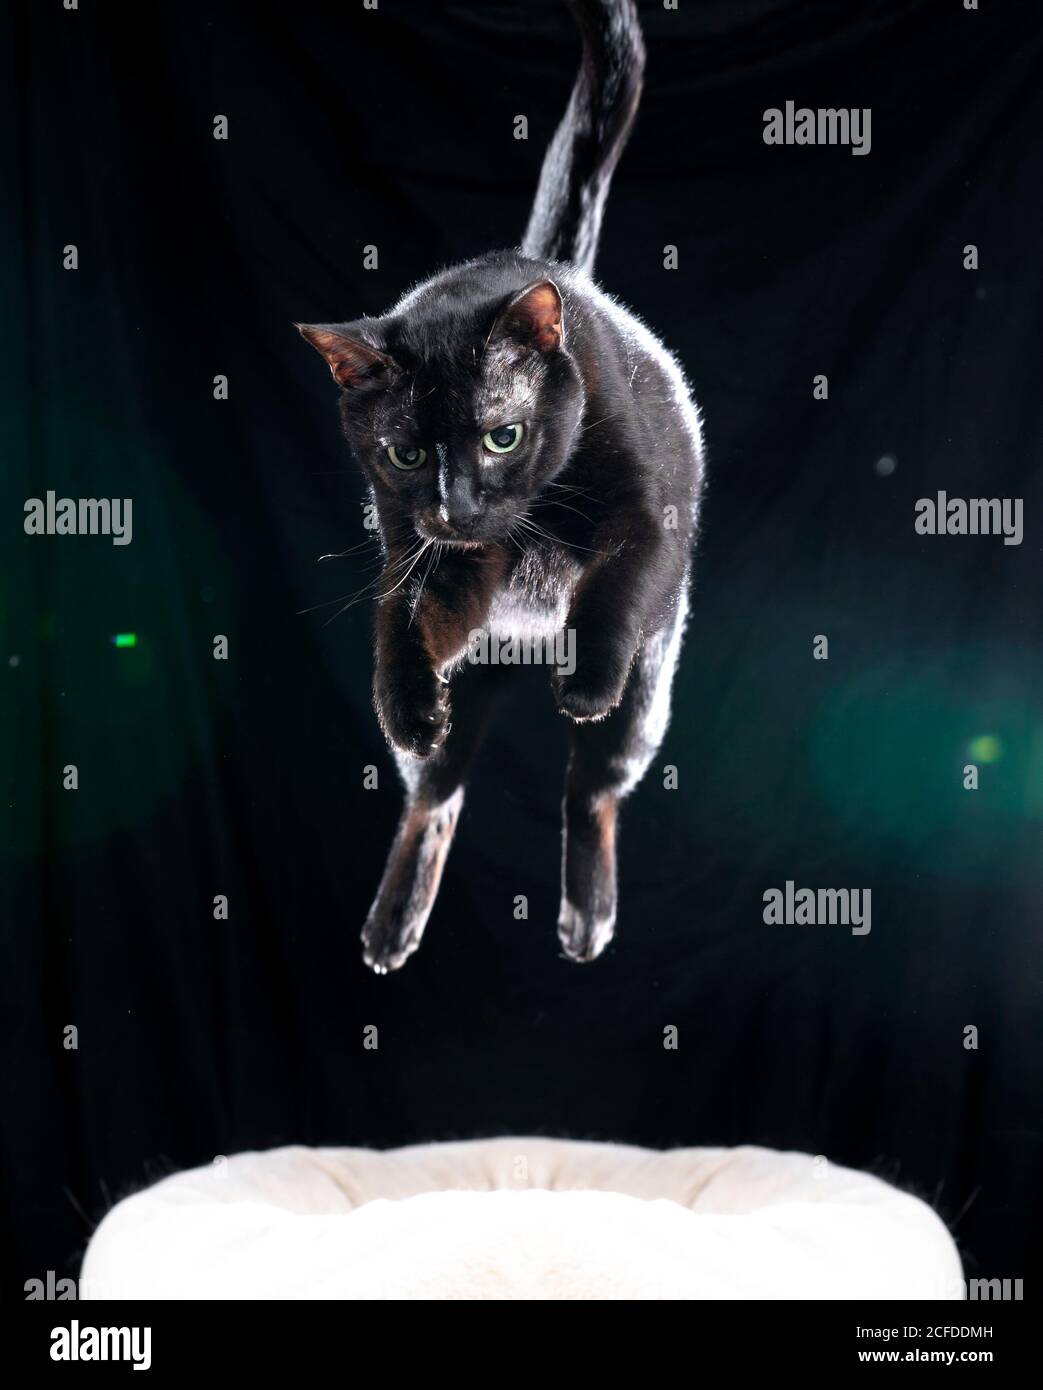 black cat jumping up in the air on black background with green lens flares Stock Photo